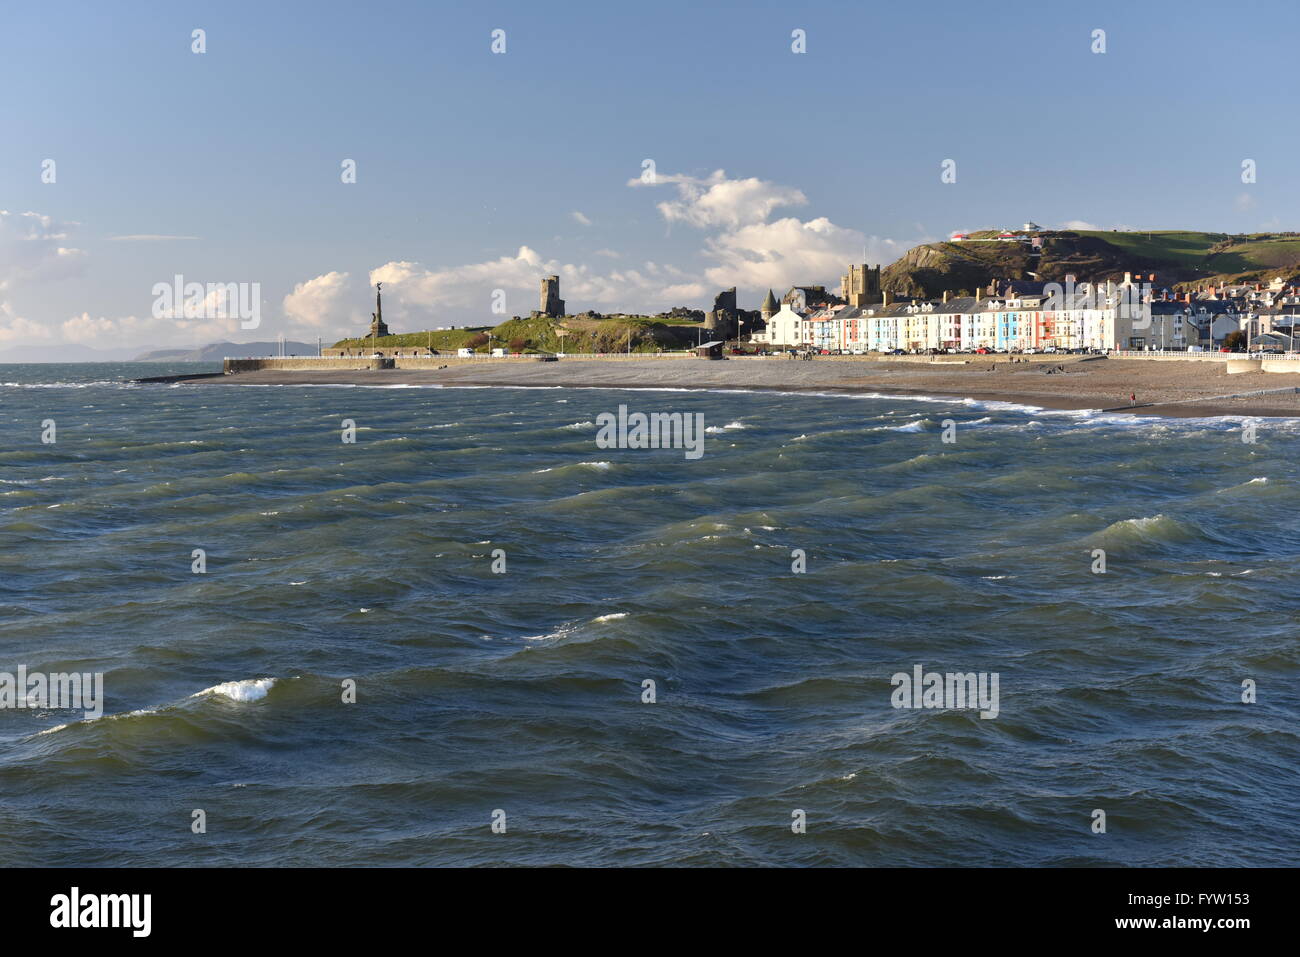 Looking north towards Aberystwyth in Cardigan Bay from Tanybwlch beach in the evening just before sunset, showing the Castle and Constitution Hill. Stock Photo